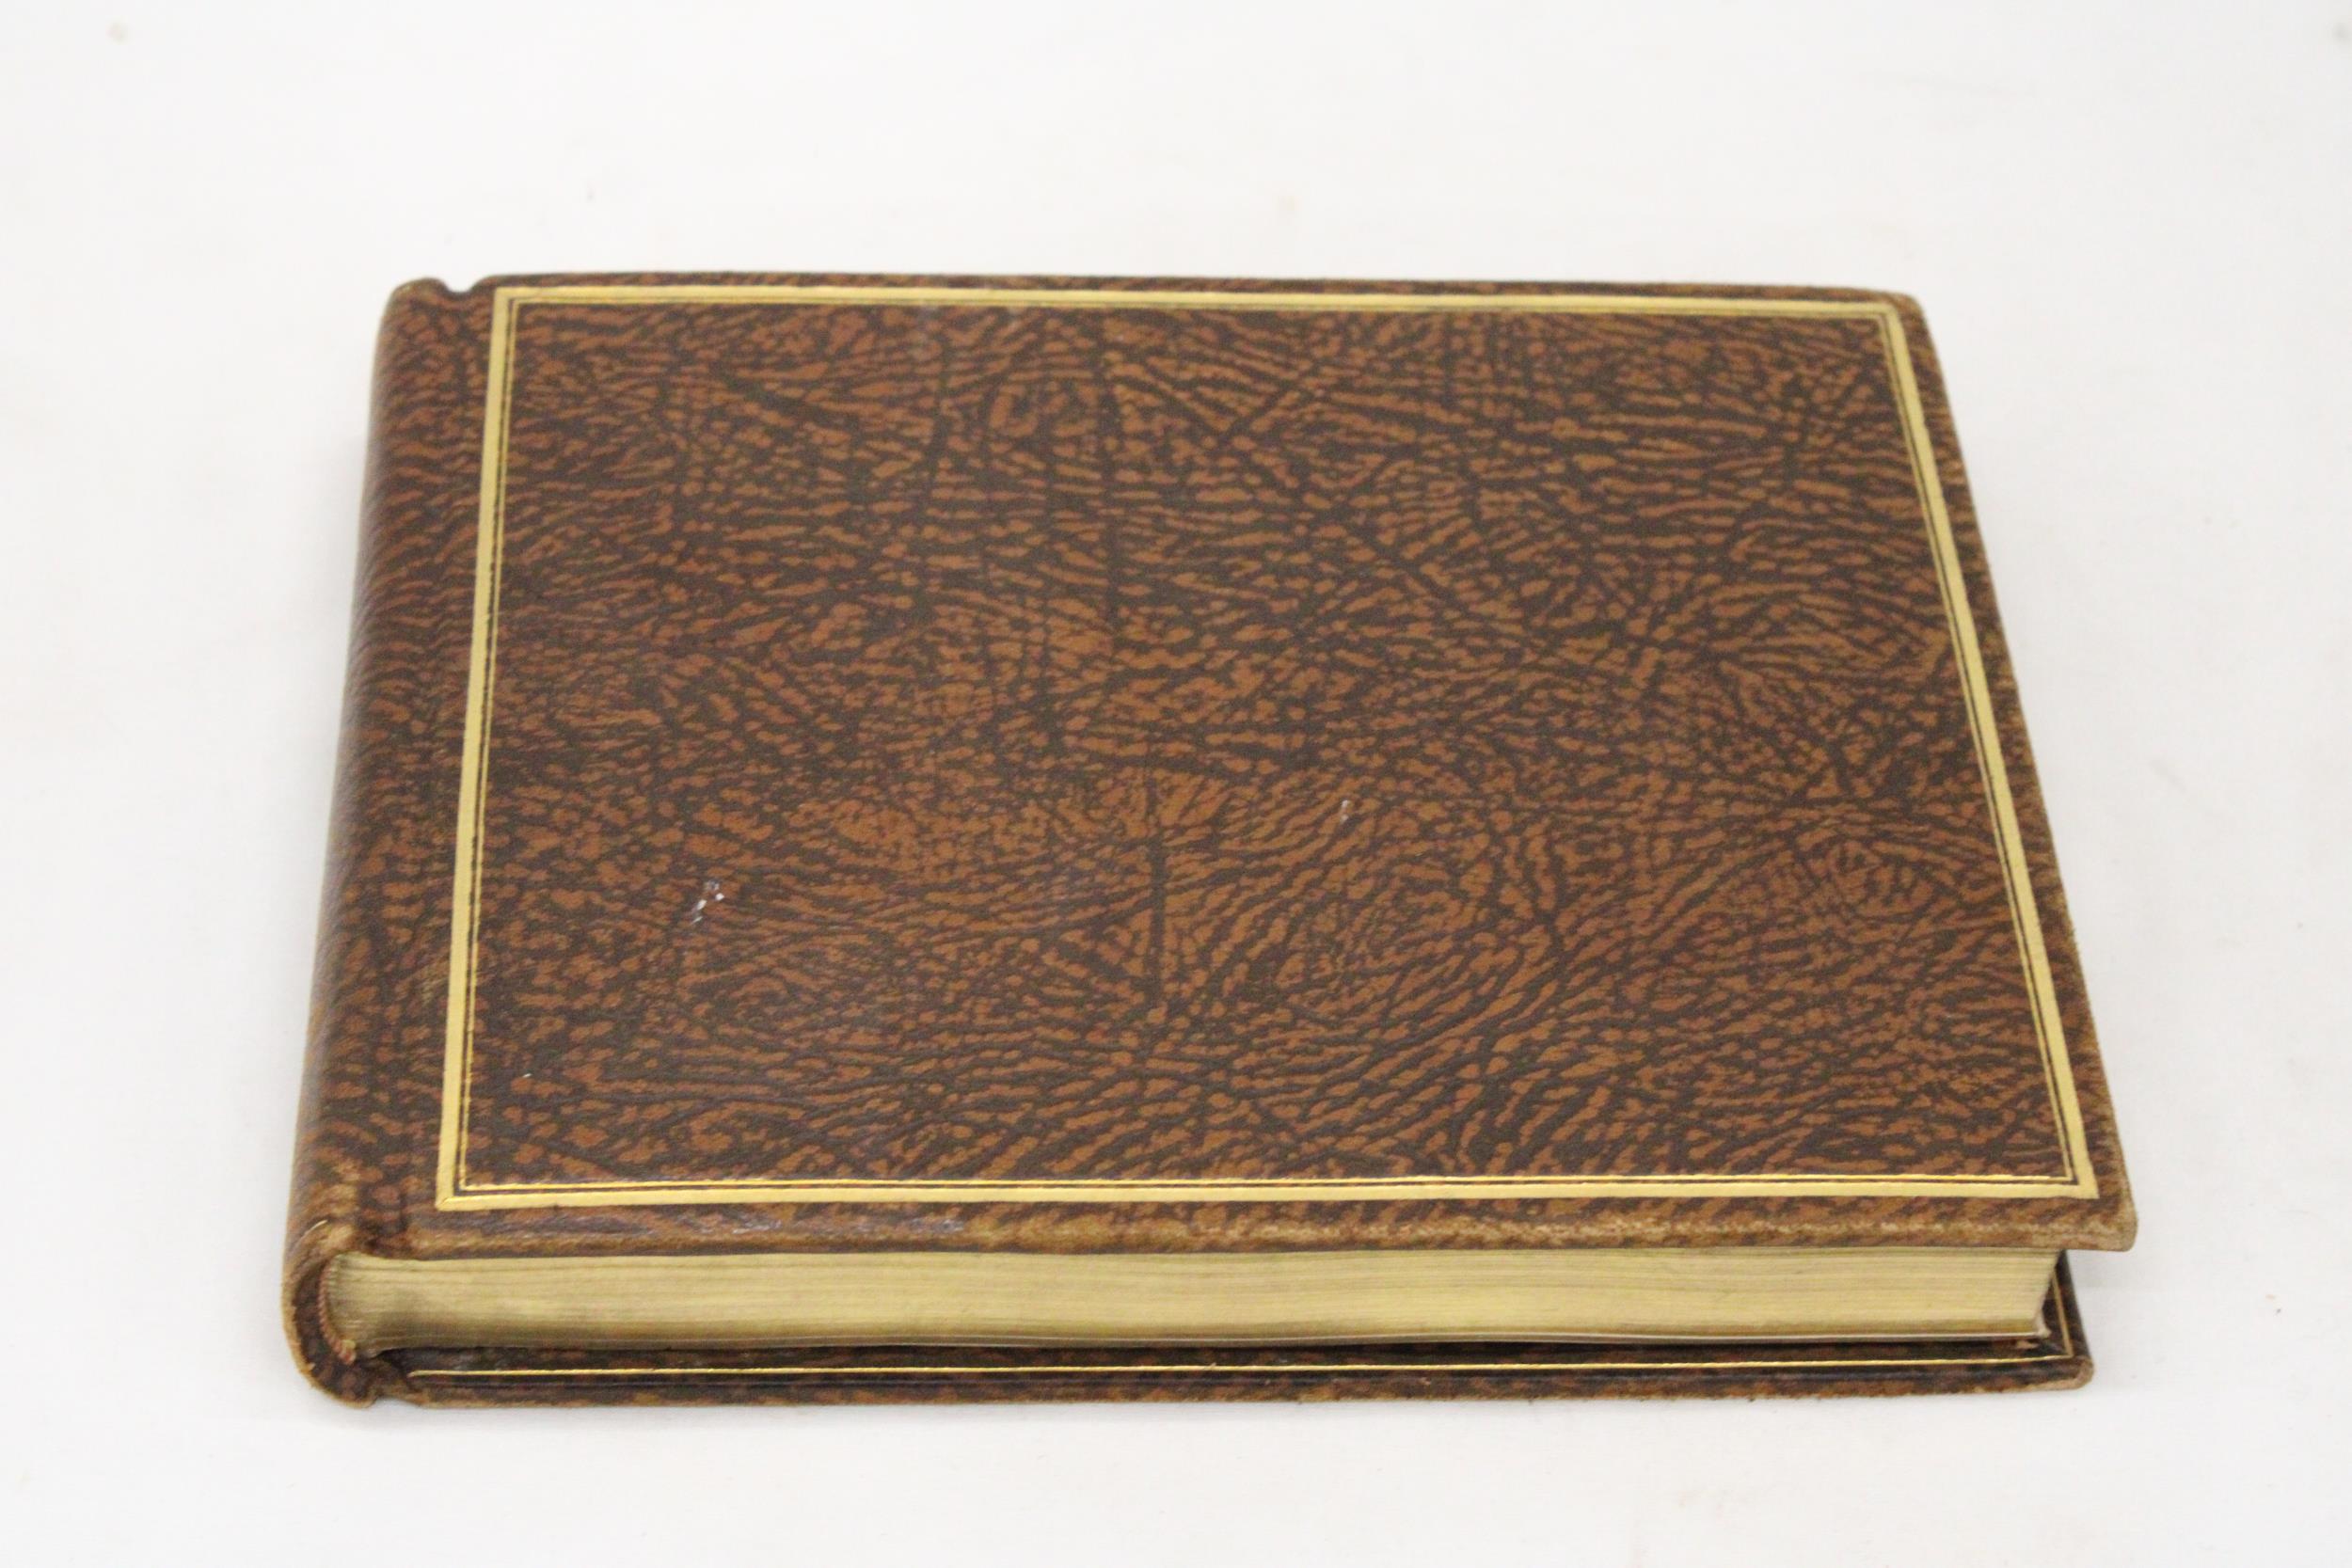 A VINTAGE LEATHER BOUND AUTOGRAPH BOOK FROM THE 1940'S WITH MOSTLY RELIGIOUS ENTRIES